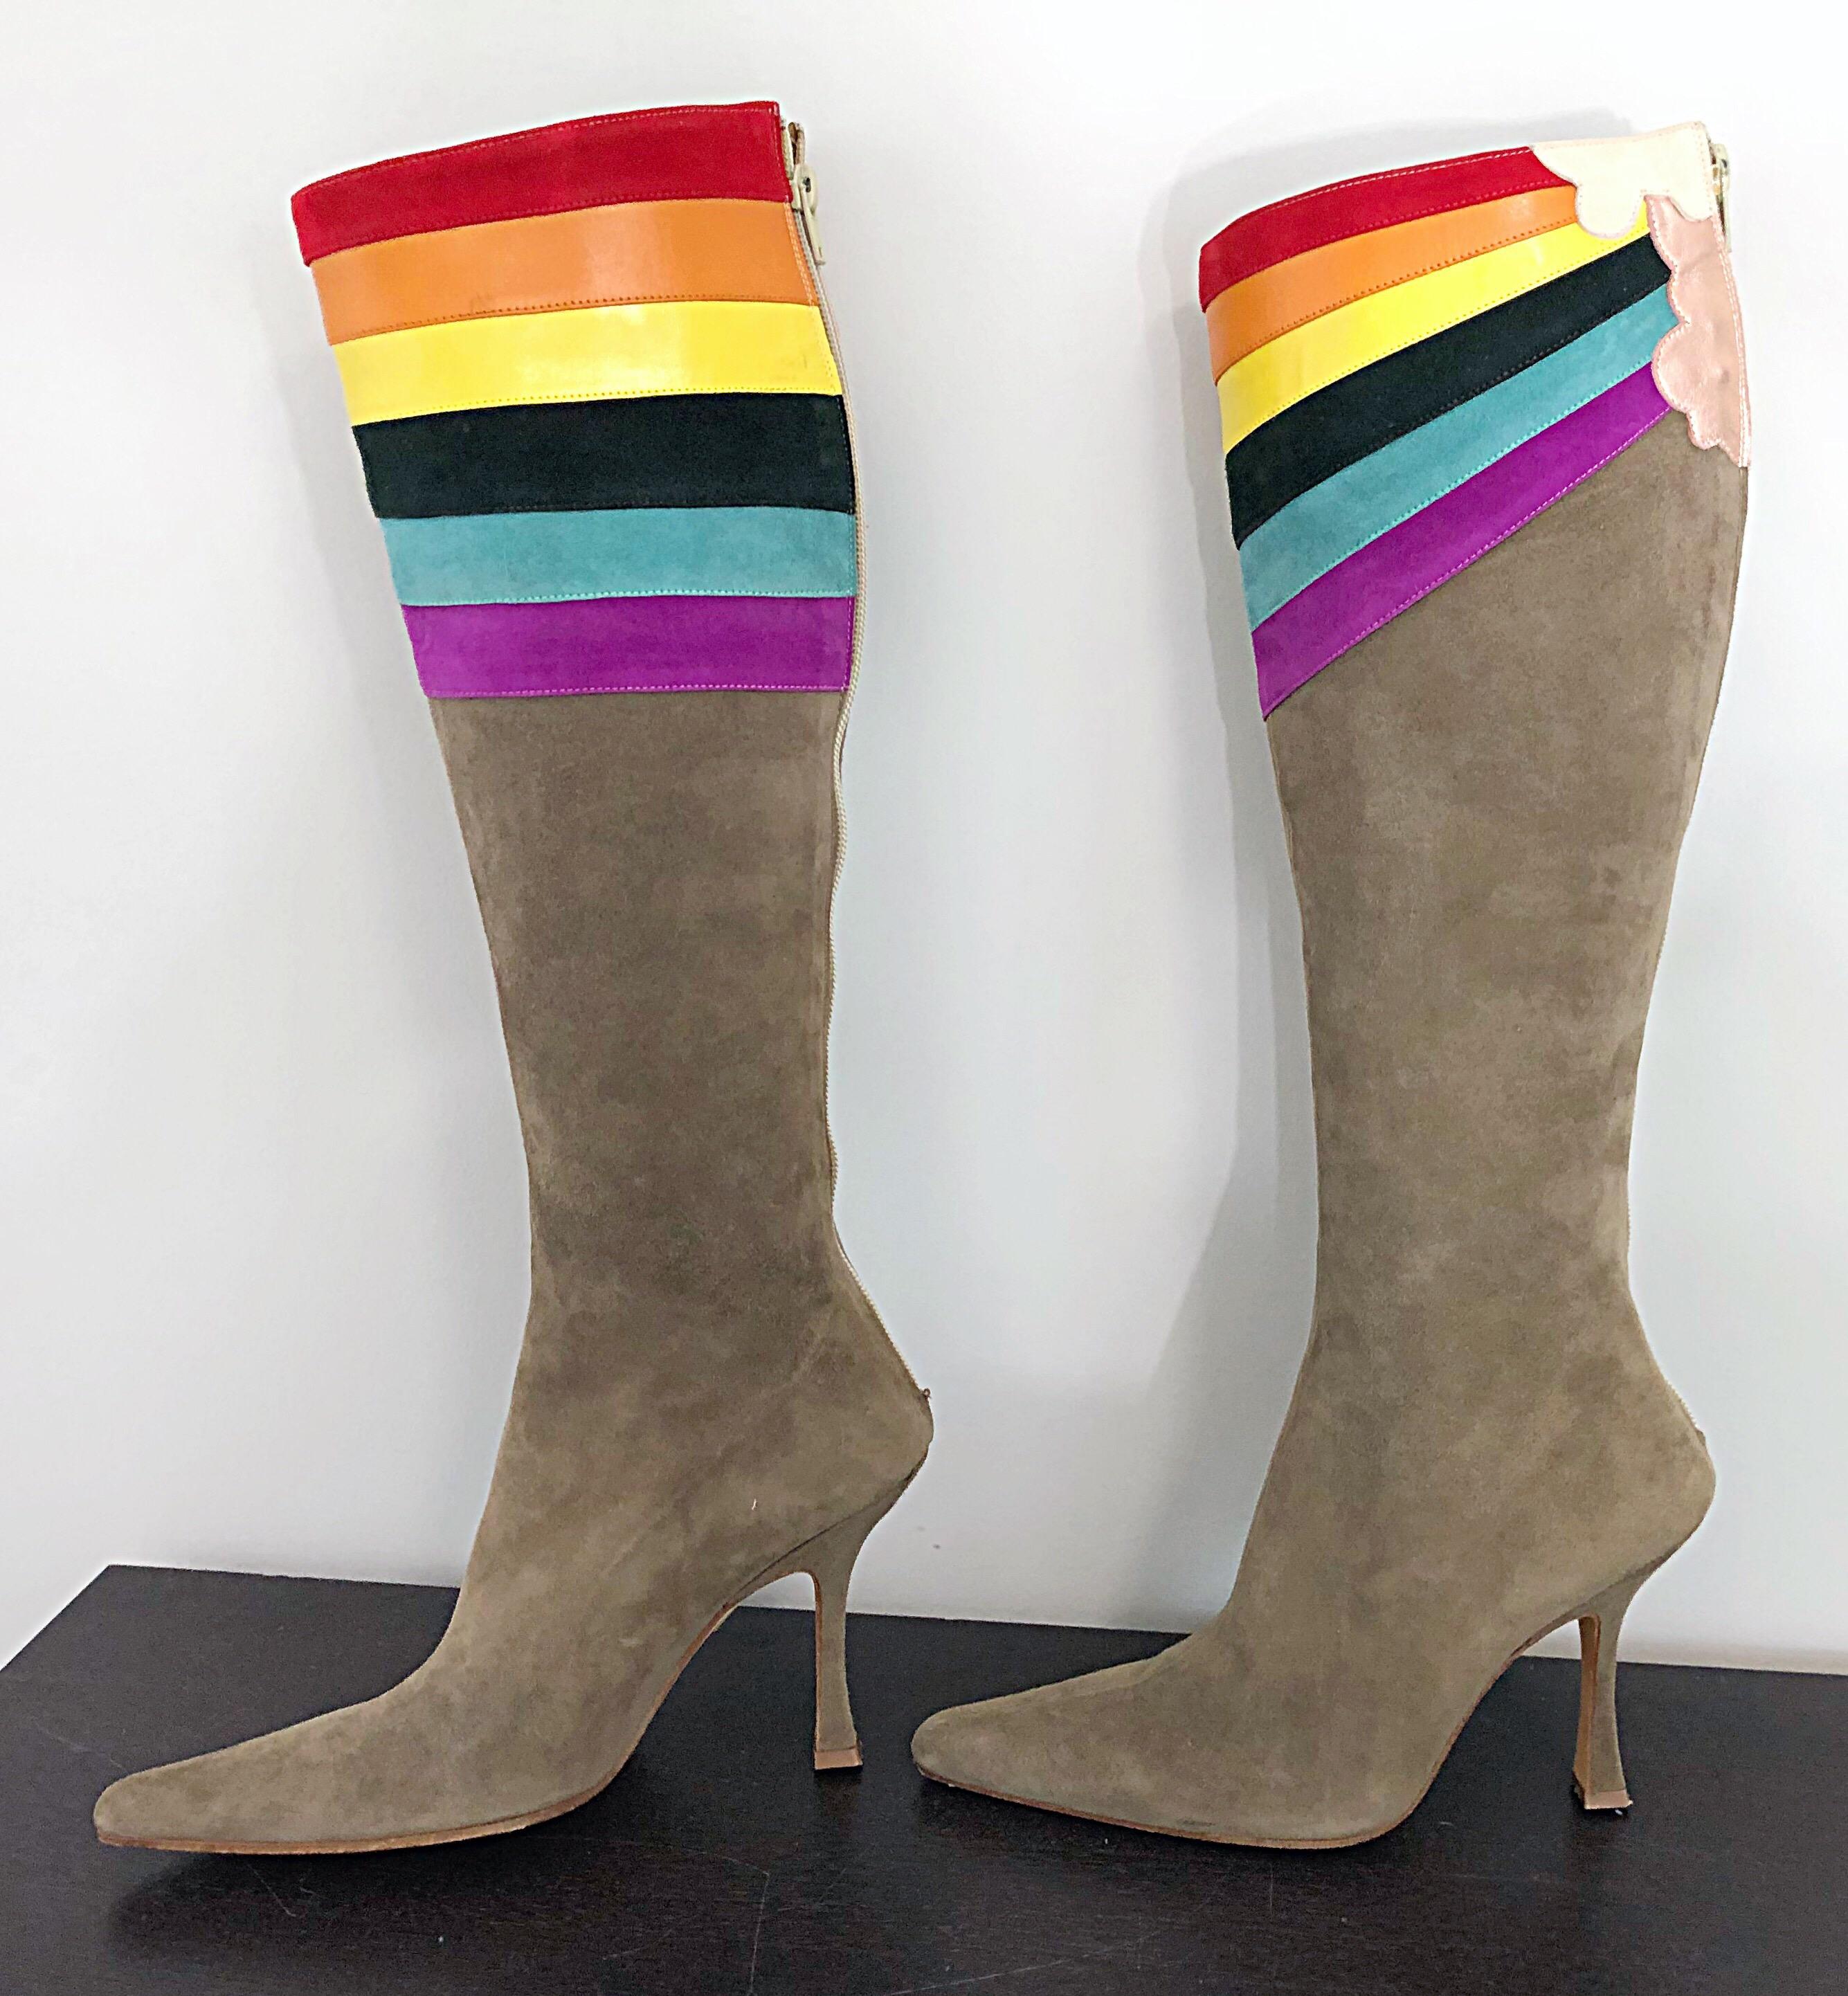 New Ashley Dearborn Size 36 / 6 Gay Pride Pegasus Rainbow High Heel Suede Boots For Sale 1